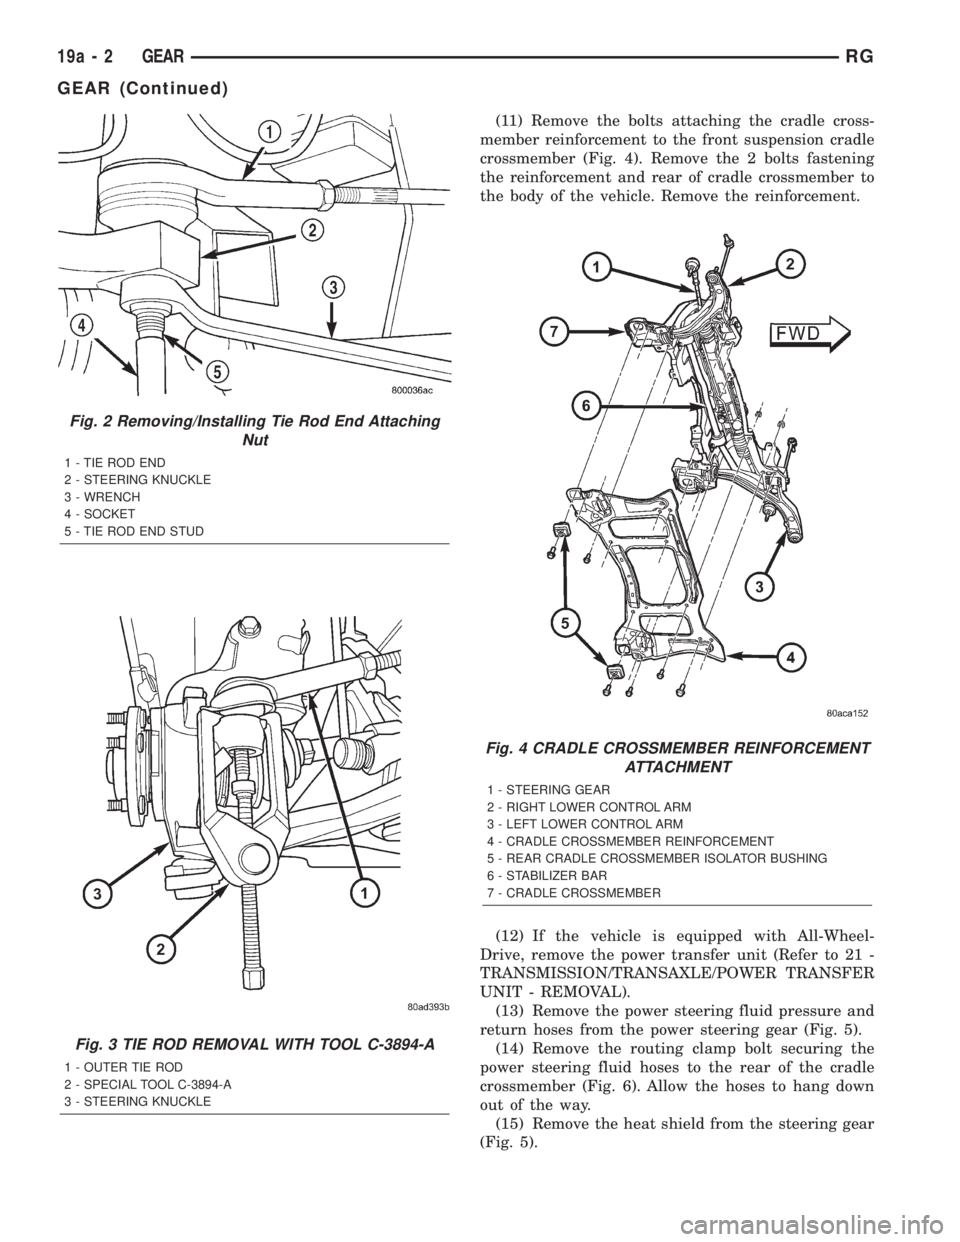 CHRYSLER VOYAGER 2001 Workshop Manual (11) Remove the bolts attaching the cradle cross-
member reinforcement to the front suspension cradle
crossmember (Fig. 4). Remove the 2 bolts fastening
the reinforcement and rear of cradle crossmembe